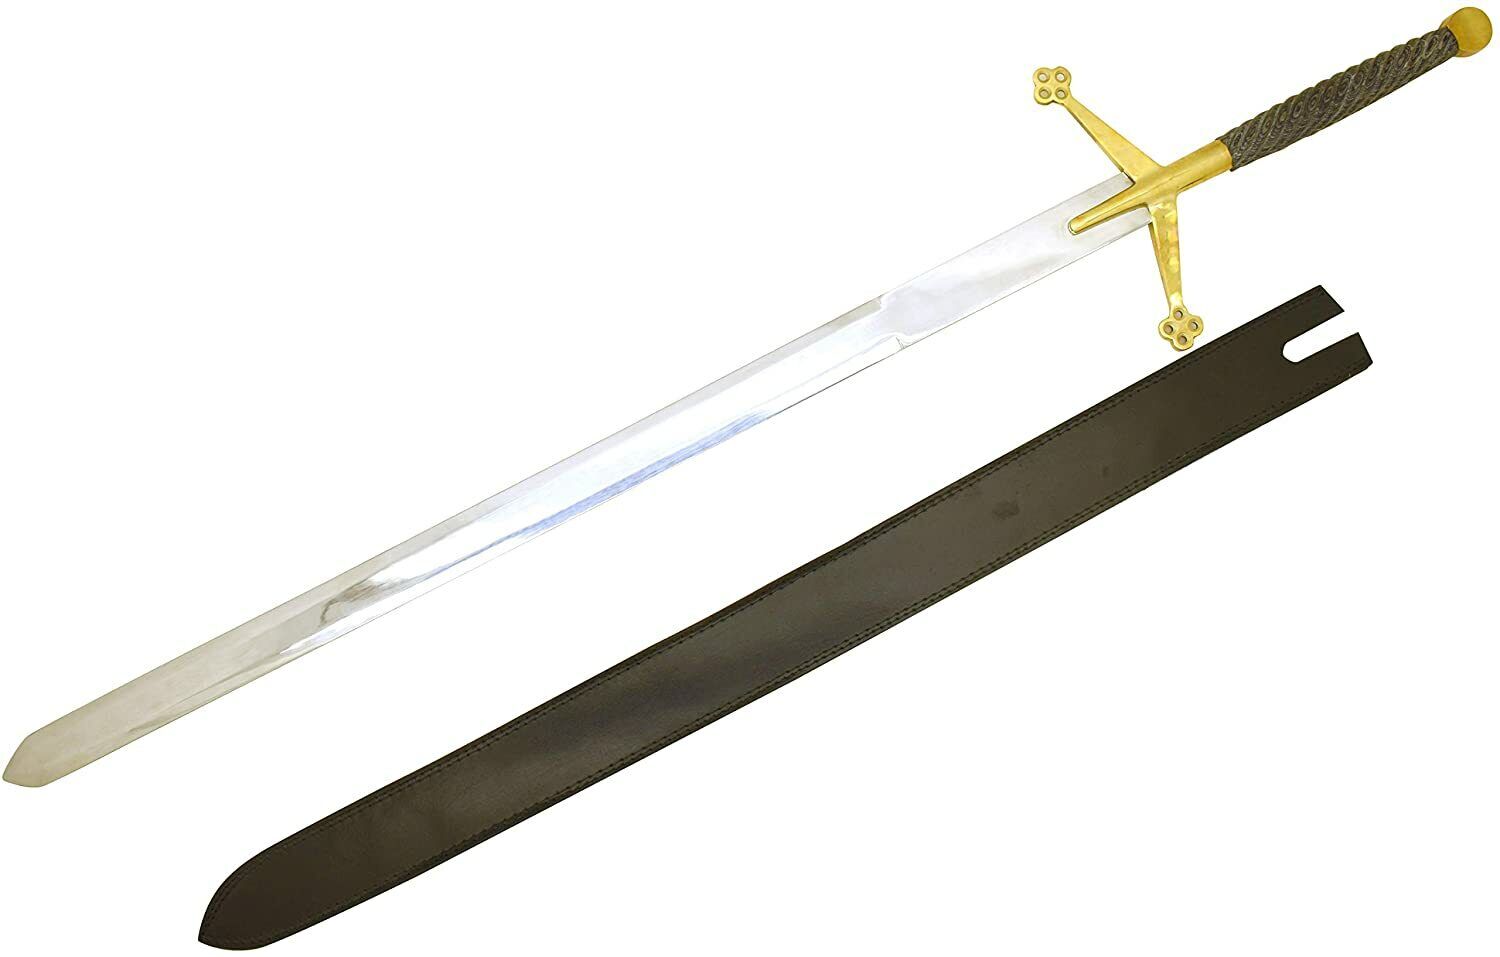 Medieval Warrior Fantasy Claymore Sword with Black Leather Sheath